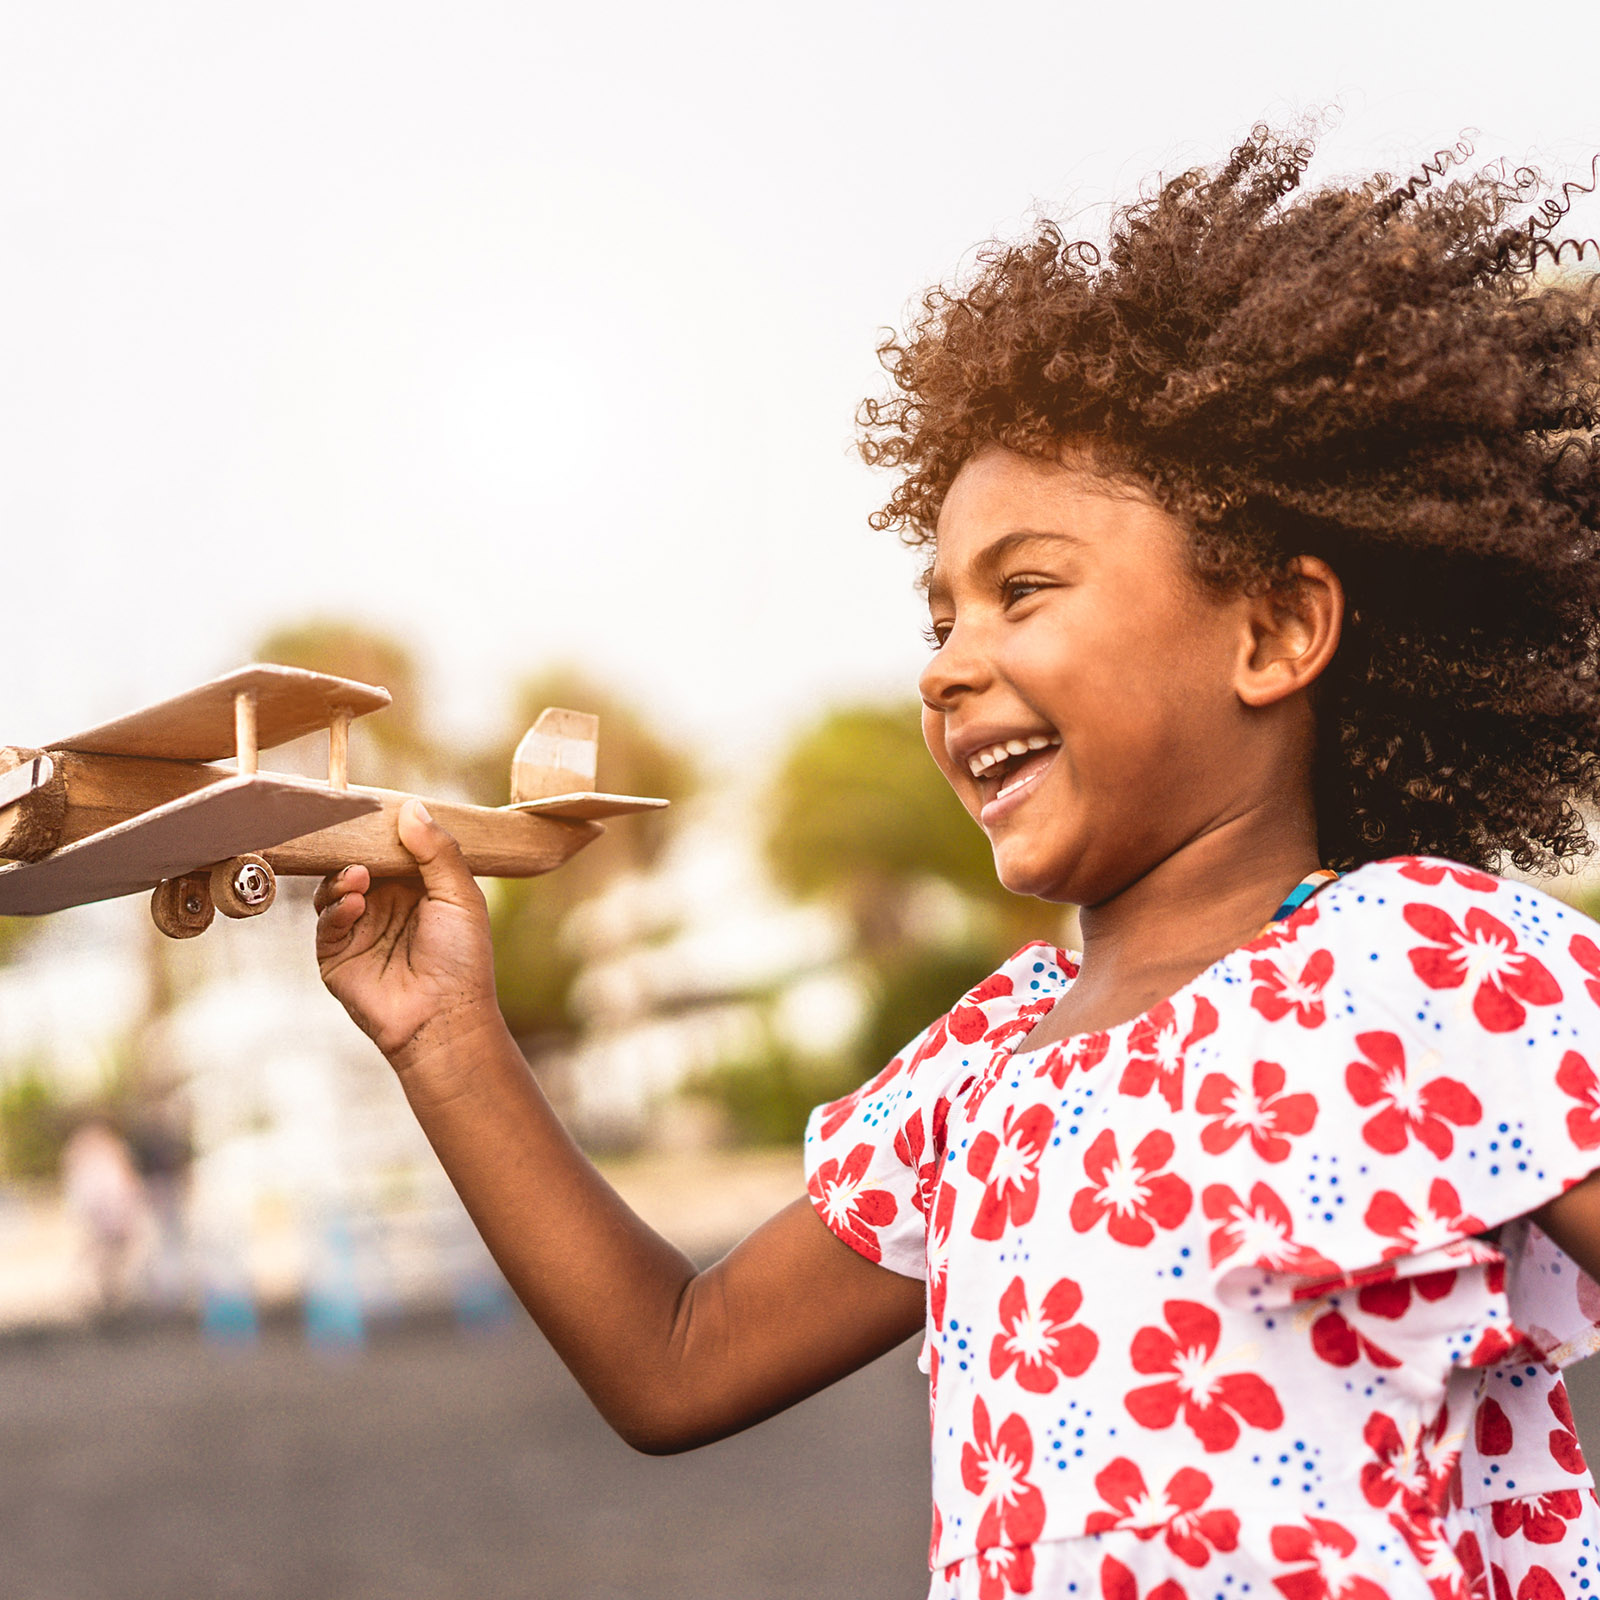 Young girl plays outside with a toy airplane